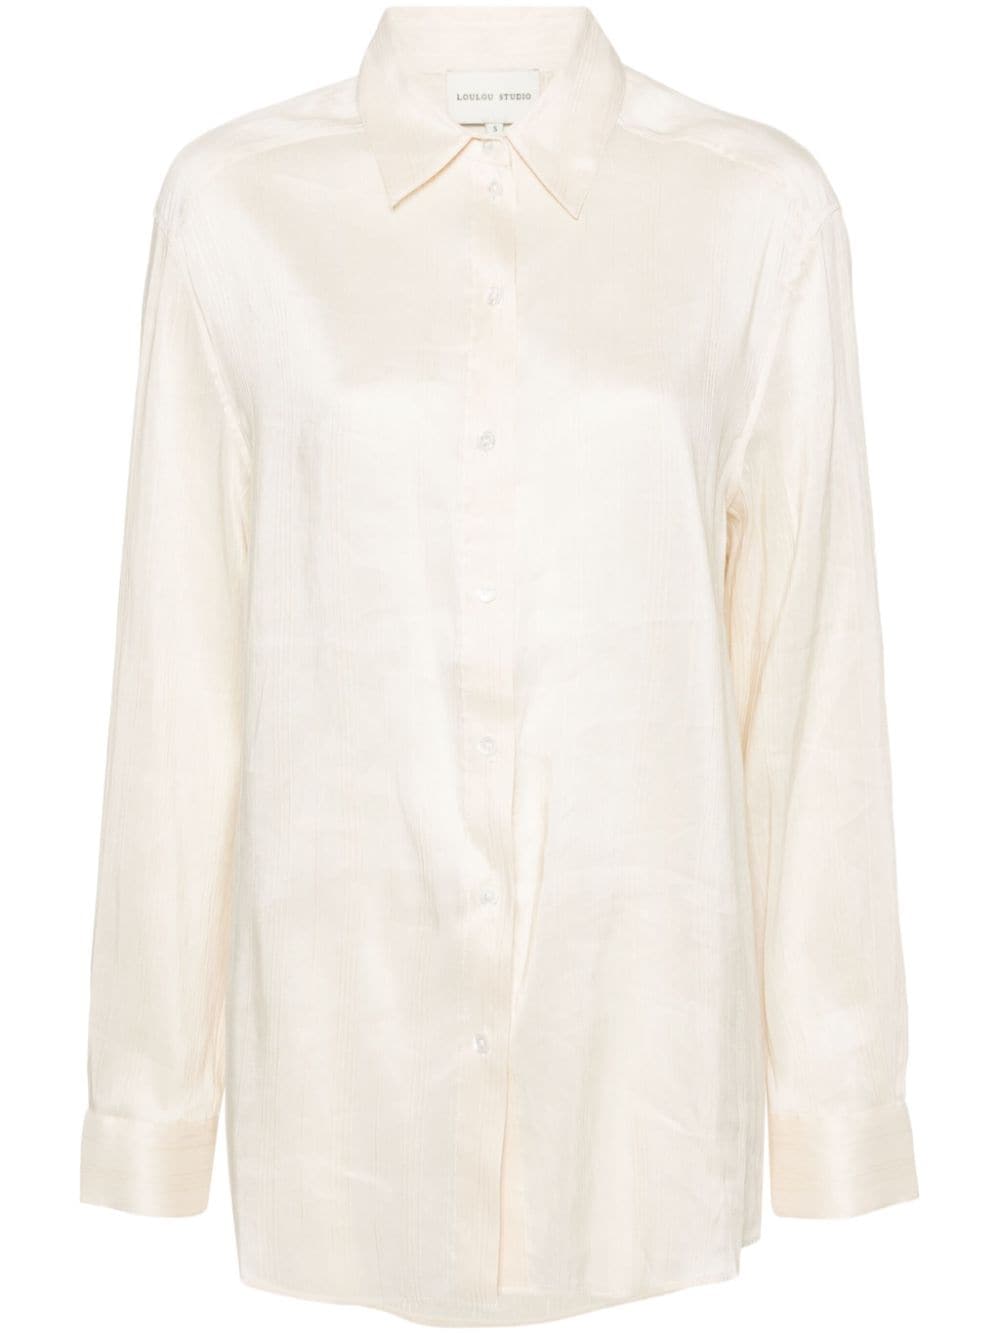 Loulou Studio Canisa Oversized Shirt In Neutrals